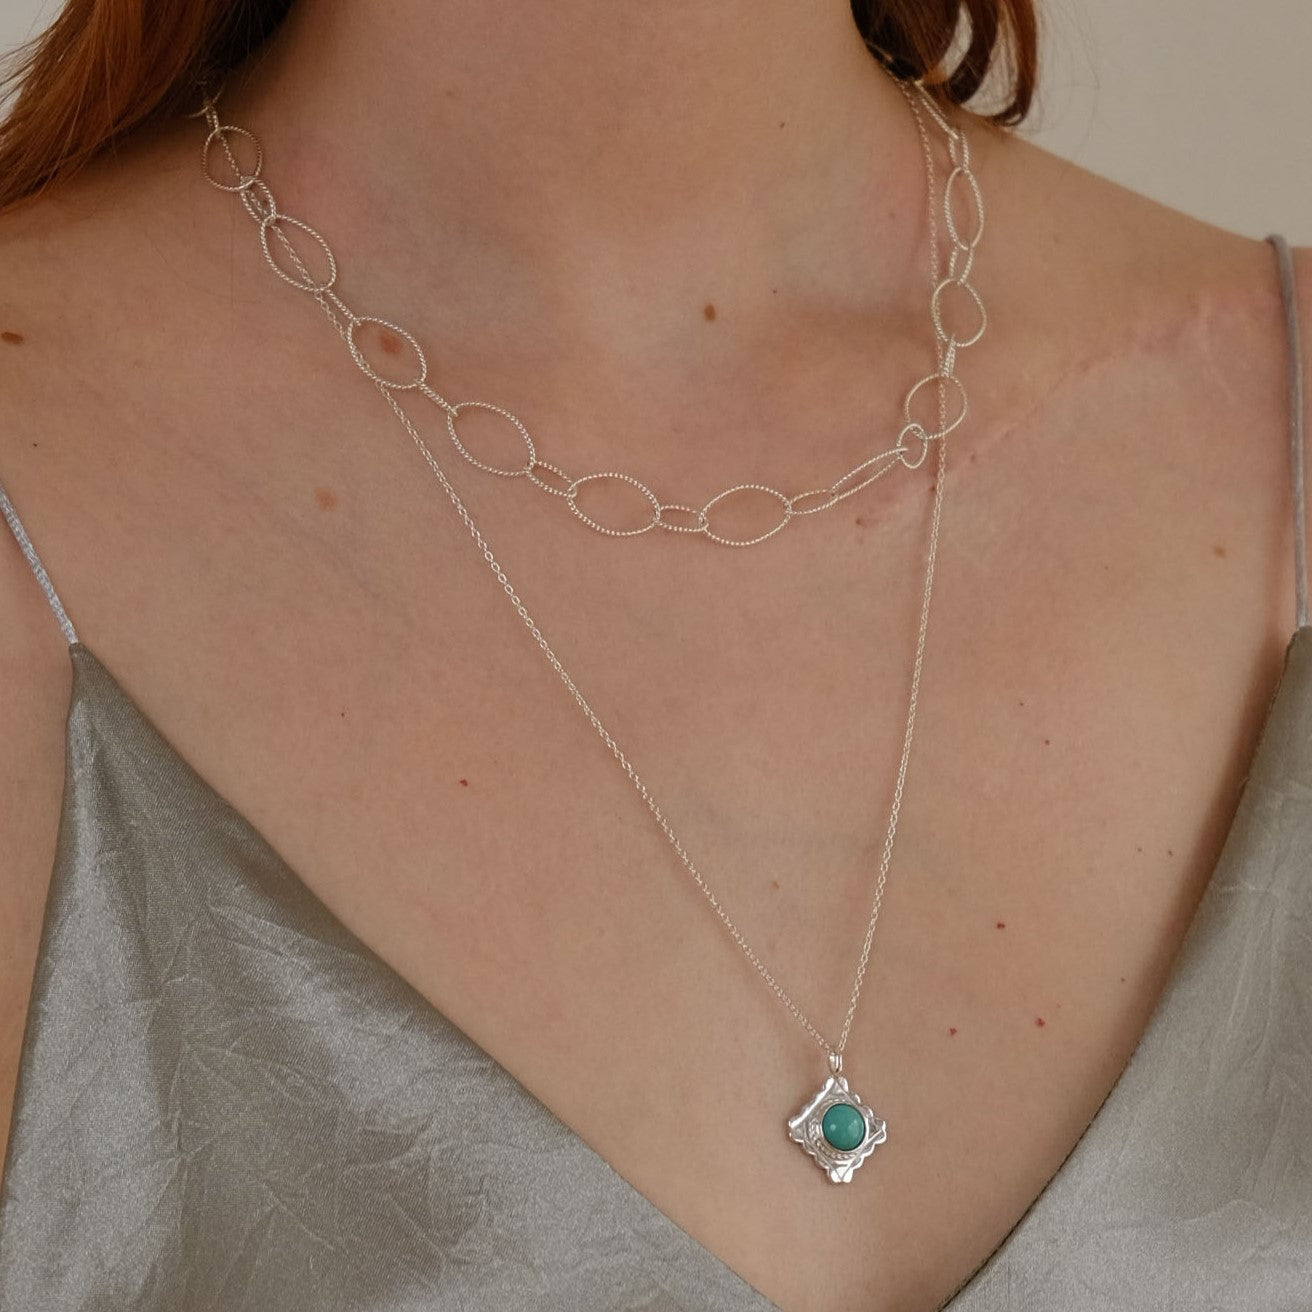 Silver Scalloped Trim Necklace (Turquoise)